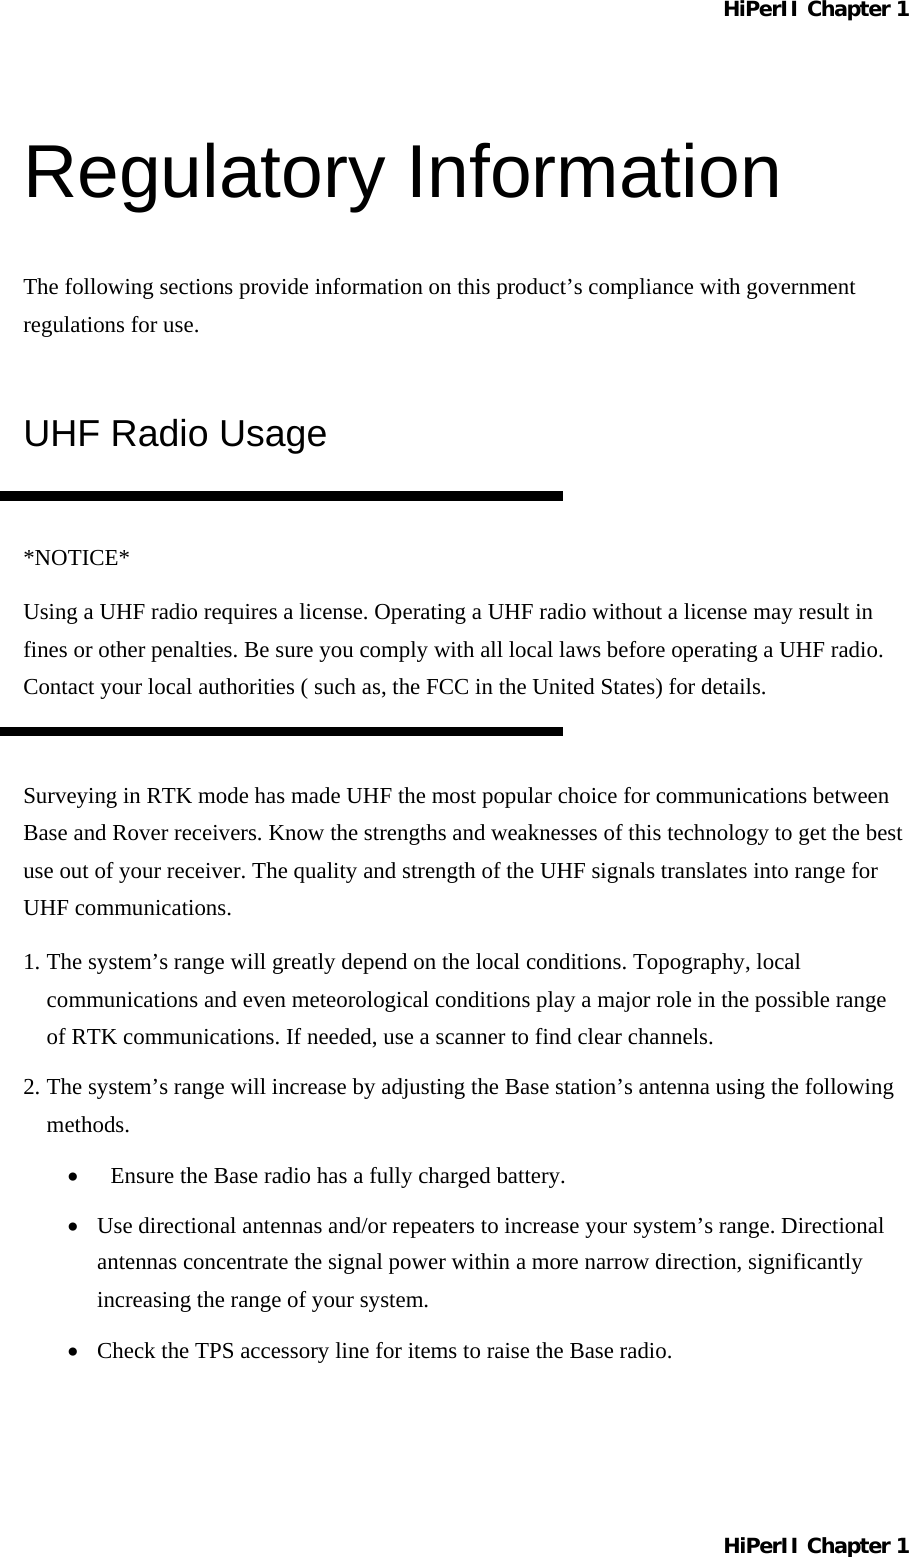 HiPerII Chapter 1 Regulatory Information The following sections provide information on this product’s compliance with government regulations for use. UHF Radio Usage  *NOTICE* Using a UHF radio requires a license. Operating a UHF radio without a license may result in fines or other penalties. Be sure you comply with all local laws before operating a UHF radio. Contact your local authorities ( such as, the FCC in the United States) for details.  Surveying in RTK mode has made UHF the most popular choice for communications between Base and Rover receivers. Know the strengths and weaknesses of this technology to get the best use out of your receiver. The quality and strength of the UHF signals translates into range for UHF communications. 1. The system’s range will greatly depend on the local conditions. Topography, local communications and even meteorological conditions play a major role in the possible range of RTK communications. If needed, use a scanner to find clear channels. 2. The system’s range will increase by adjusting the Base station’s antenna using the following methods. •  Ensure the Base radio has a fully charged battery. •  Use directional antennas and/or repeaters to increase your system’s range. Directional antennas concentrate the signal power within a more narrow direction, significantly increasing the range of your system. •  Check the TPS accessory line for items to raise the Base radio. HiPerII Chapter 1 